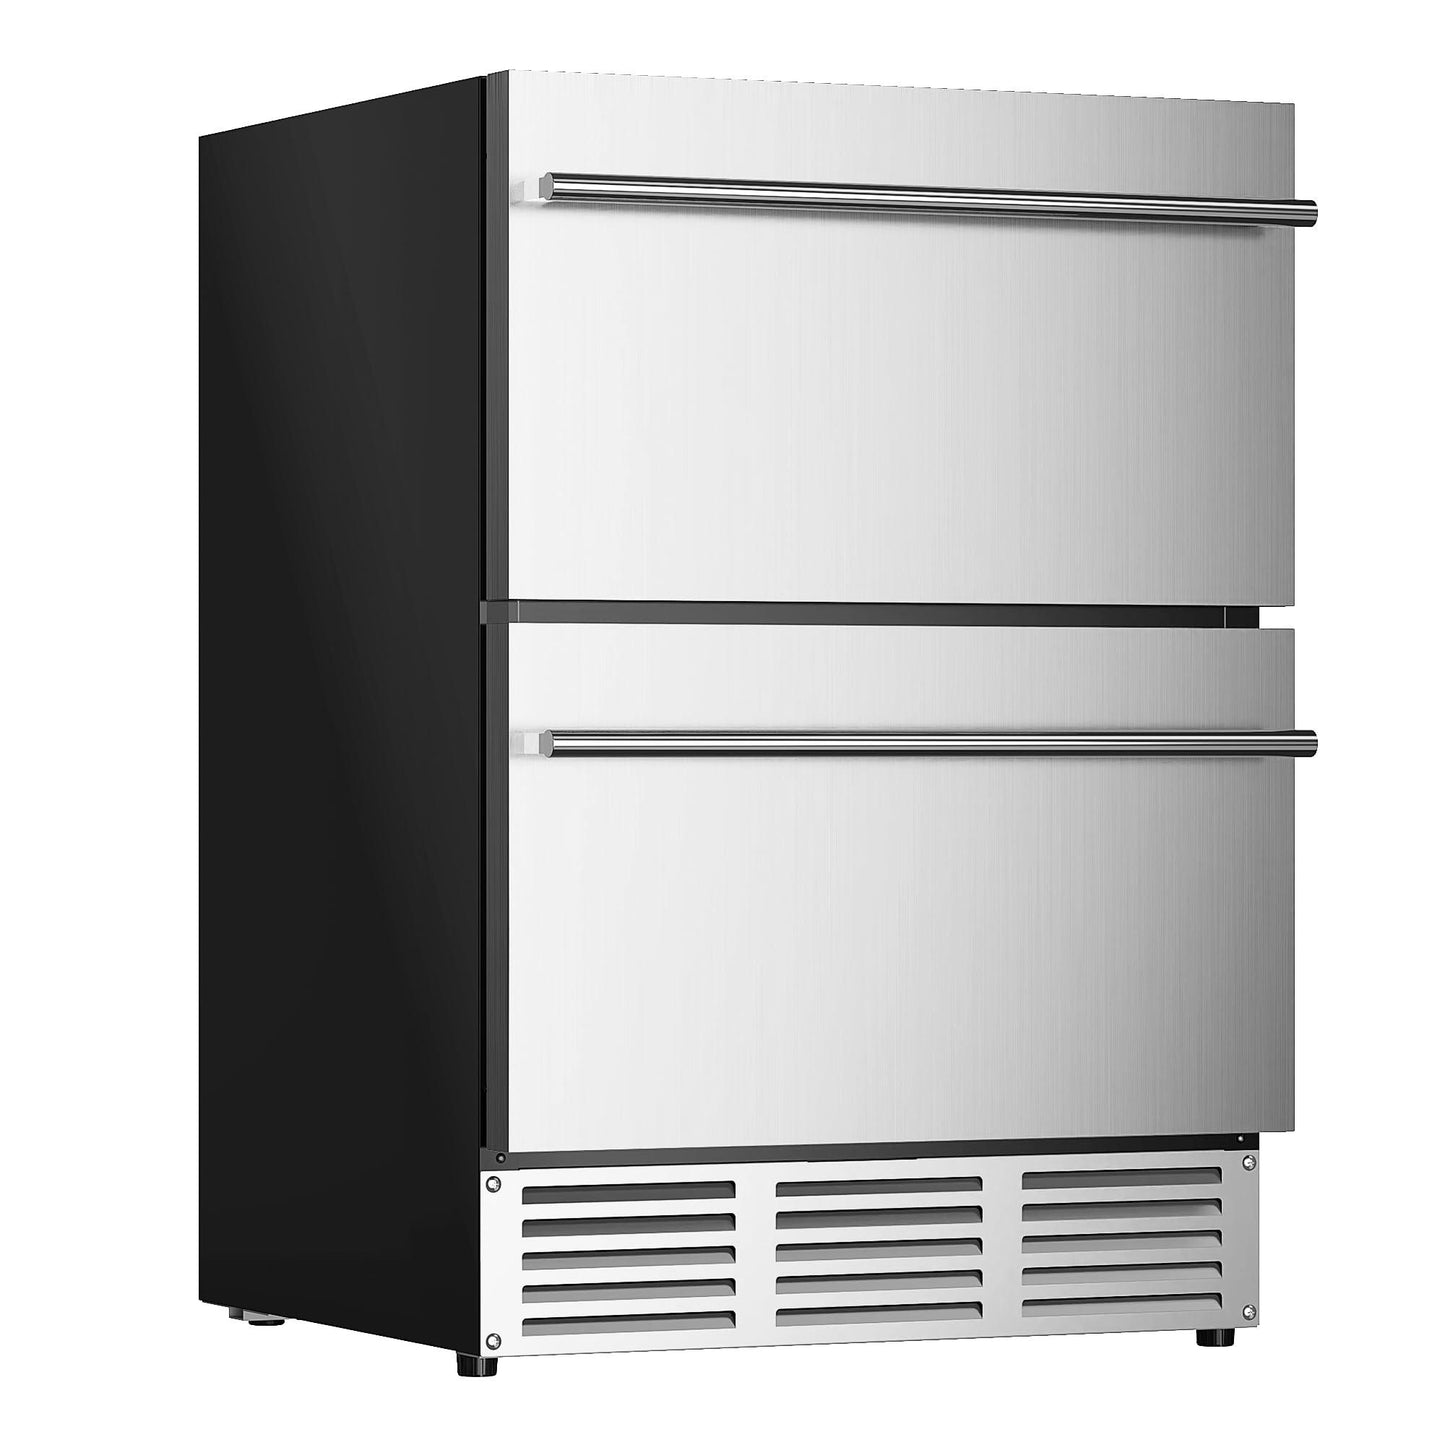 EUHOMY 24 Inch Under Counter Double Drawer Fridge, Weather Proof Stainless Steel Outdoor Beverage Refrigerator for Patio, Built-in Beverage Fridge with ETL/DOE/CEC, Home & Commercial Use. - CookCave